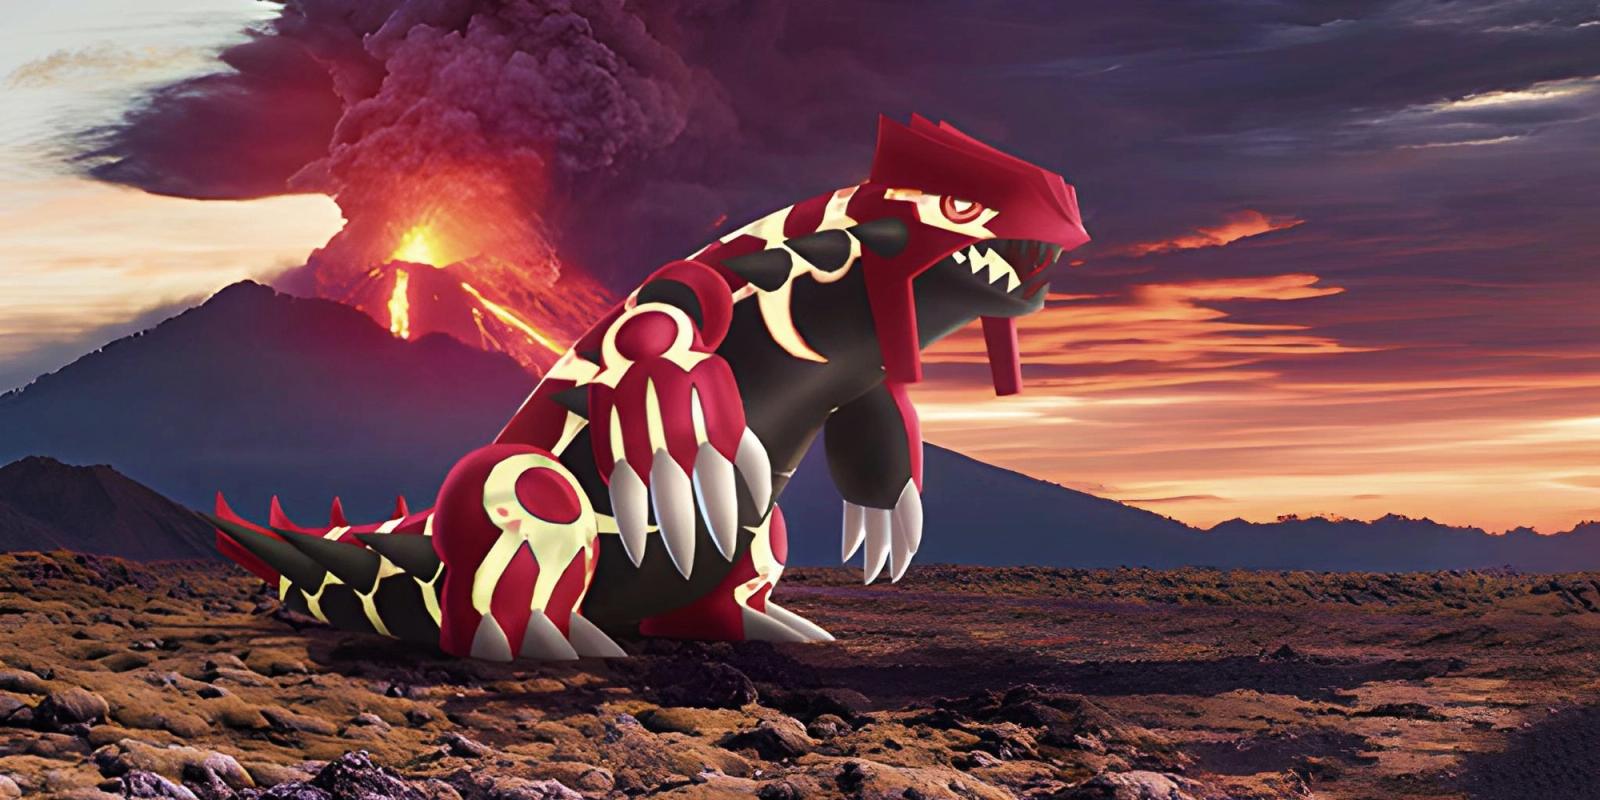 Pokemon Go - large red, gold, and black lizard pokemon (Groudon) in front of an erupting volcano.